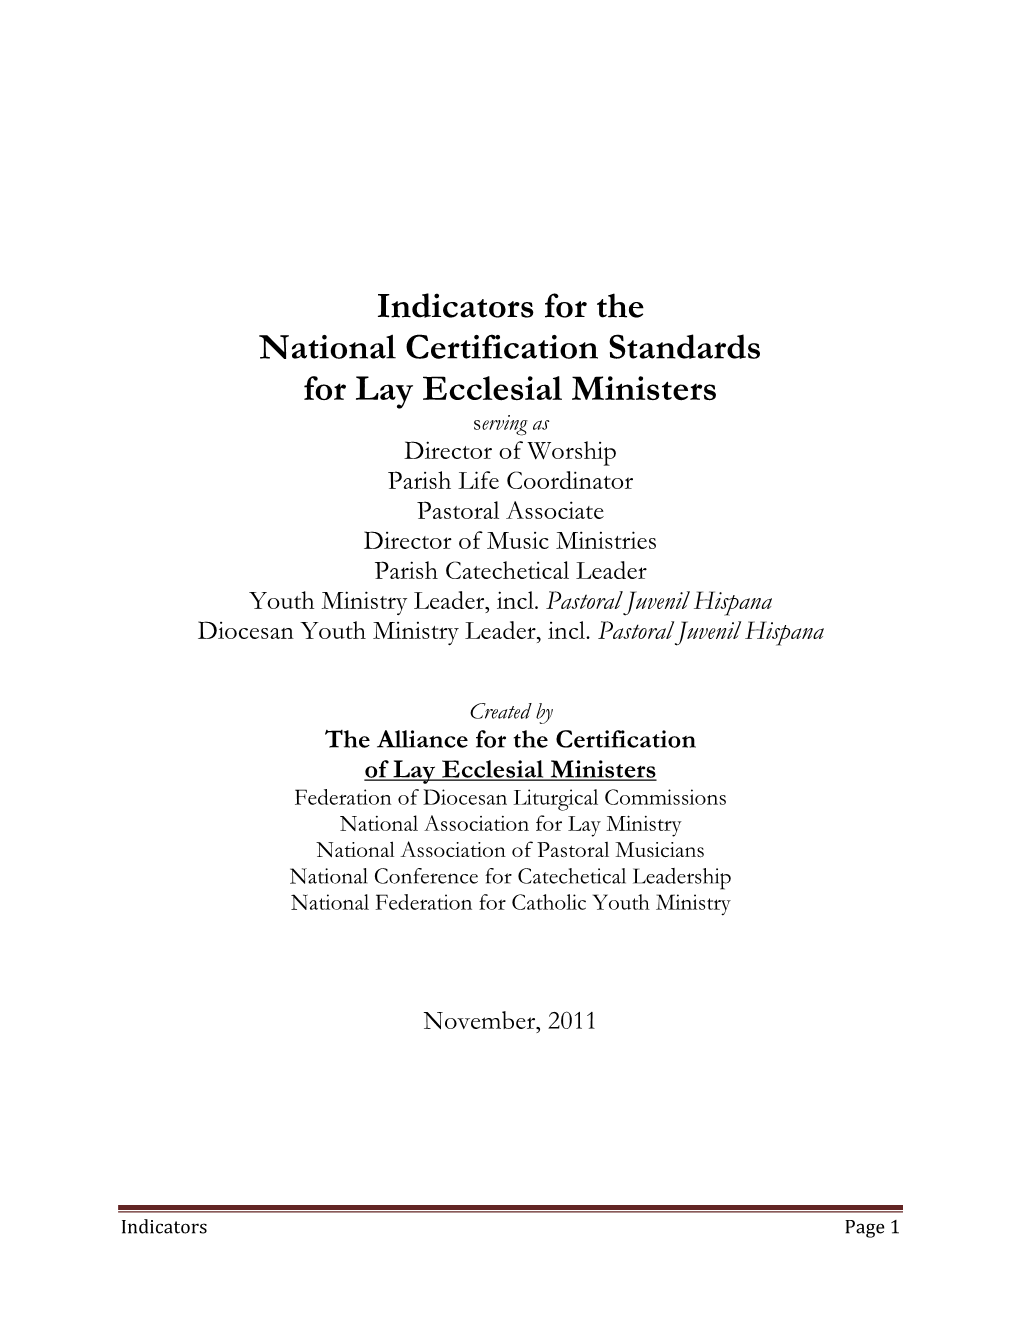 Indicators for the National Certification Standards for Lay Ecclesial